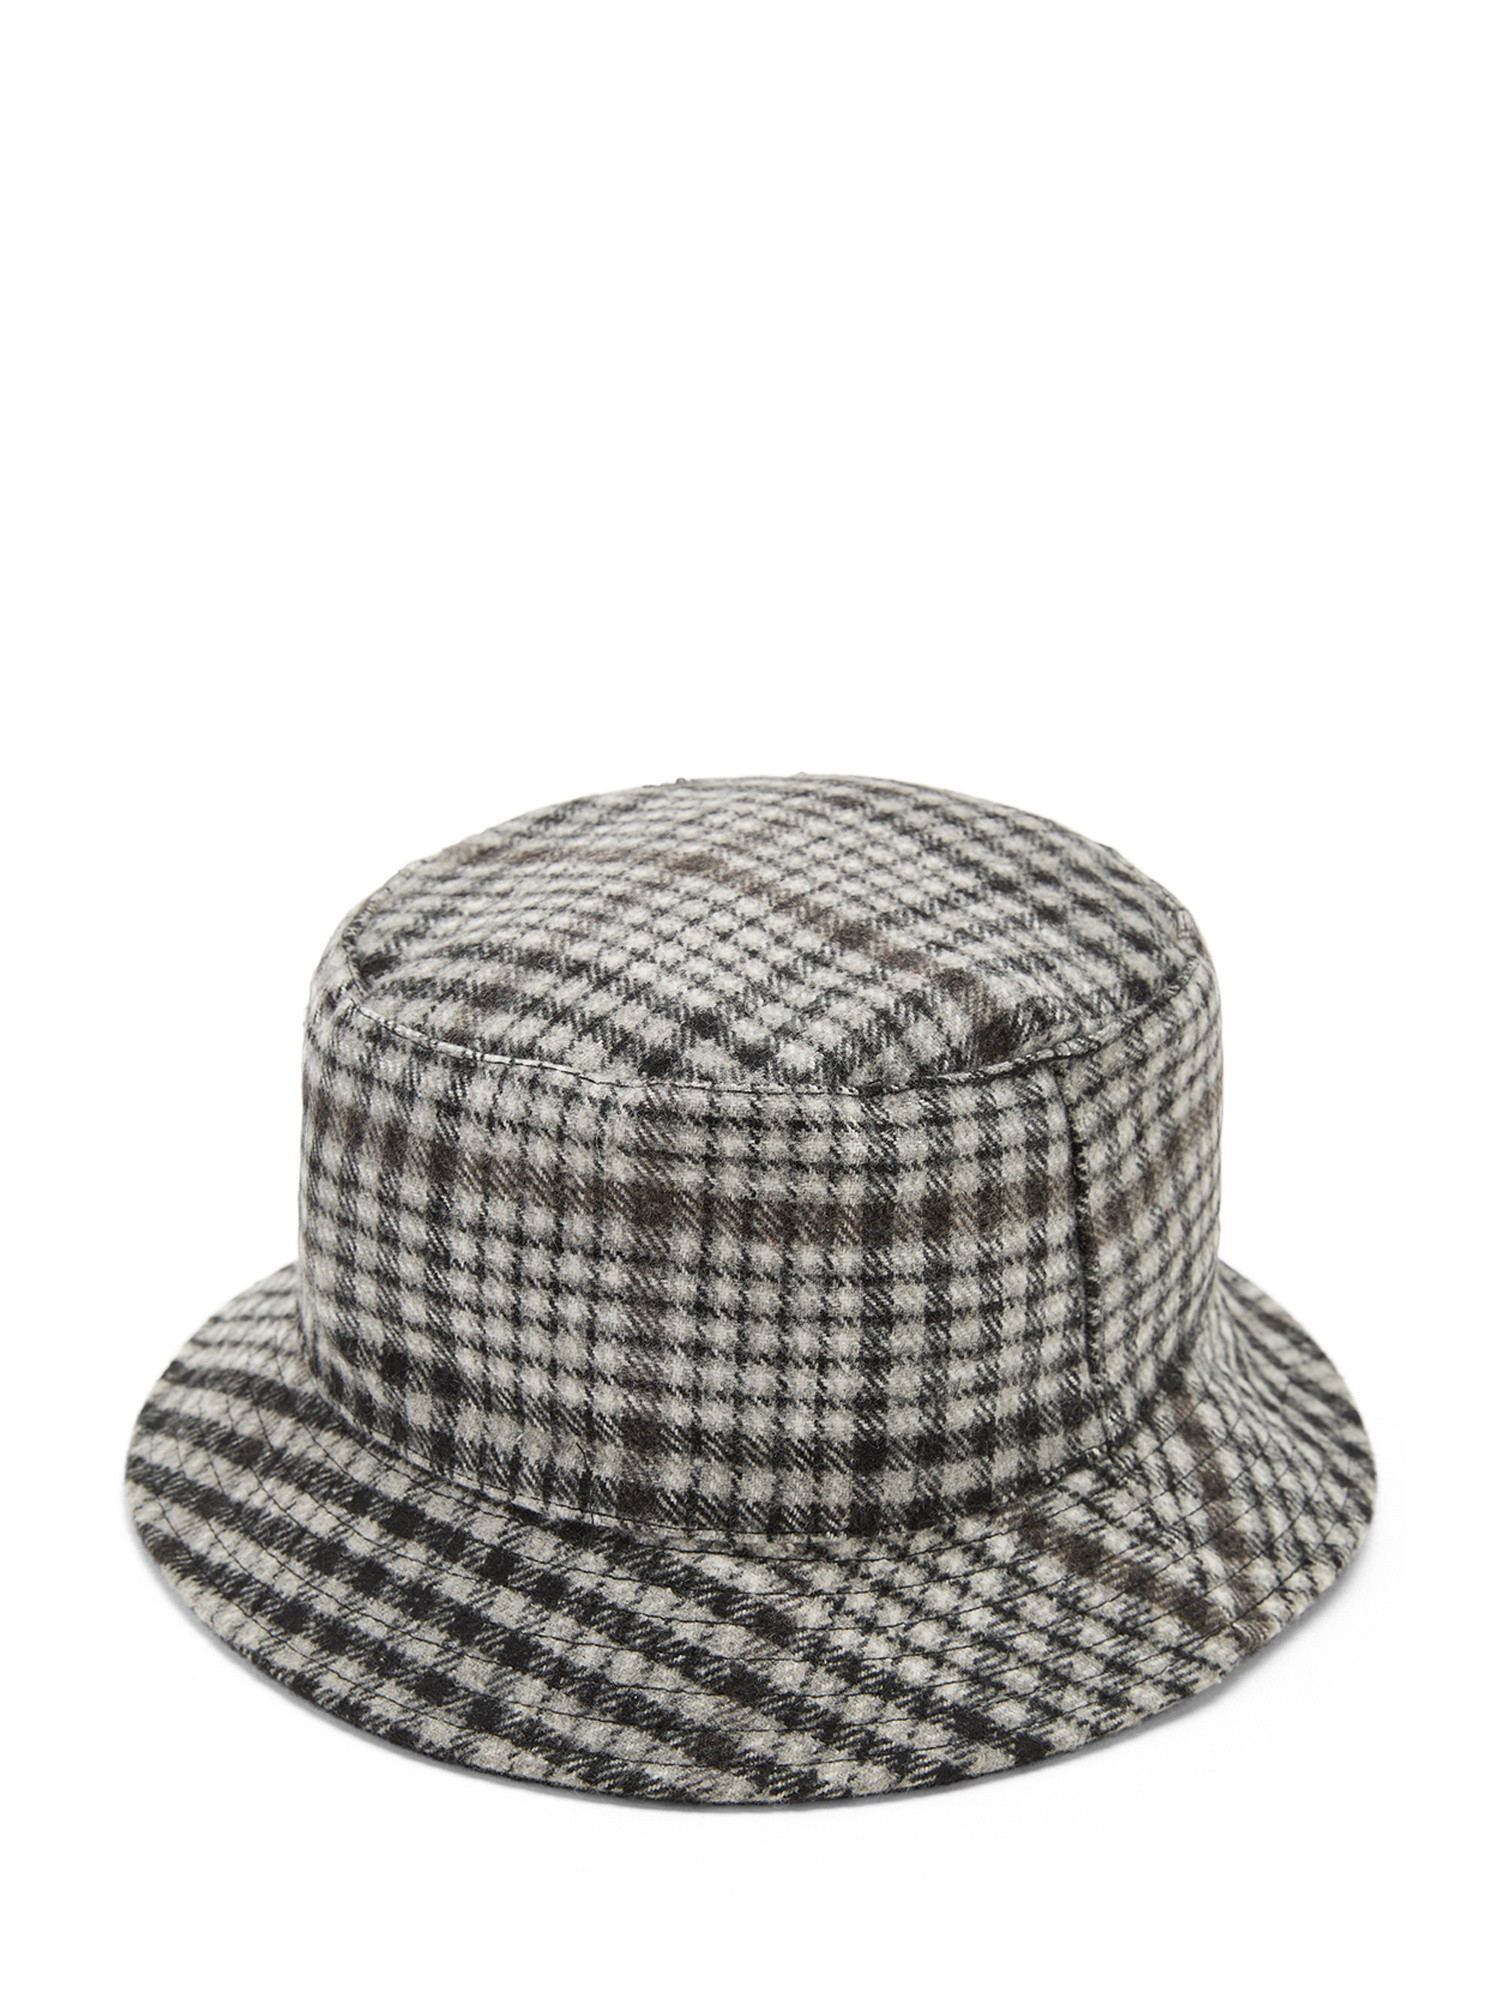 Koan - Checked cloche hat, Grey, large image number 0